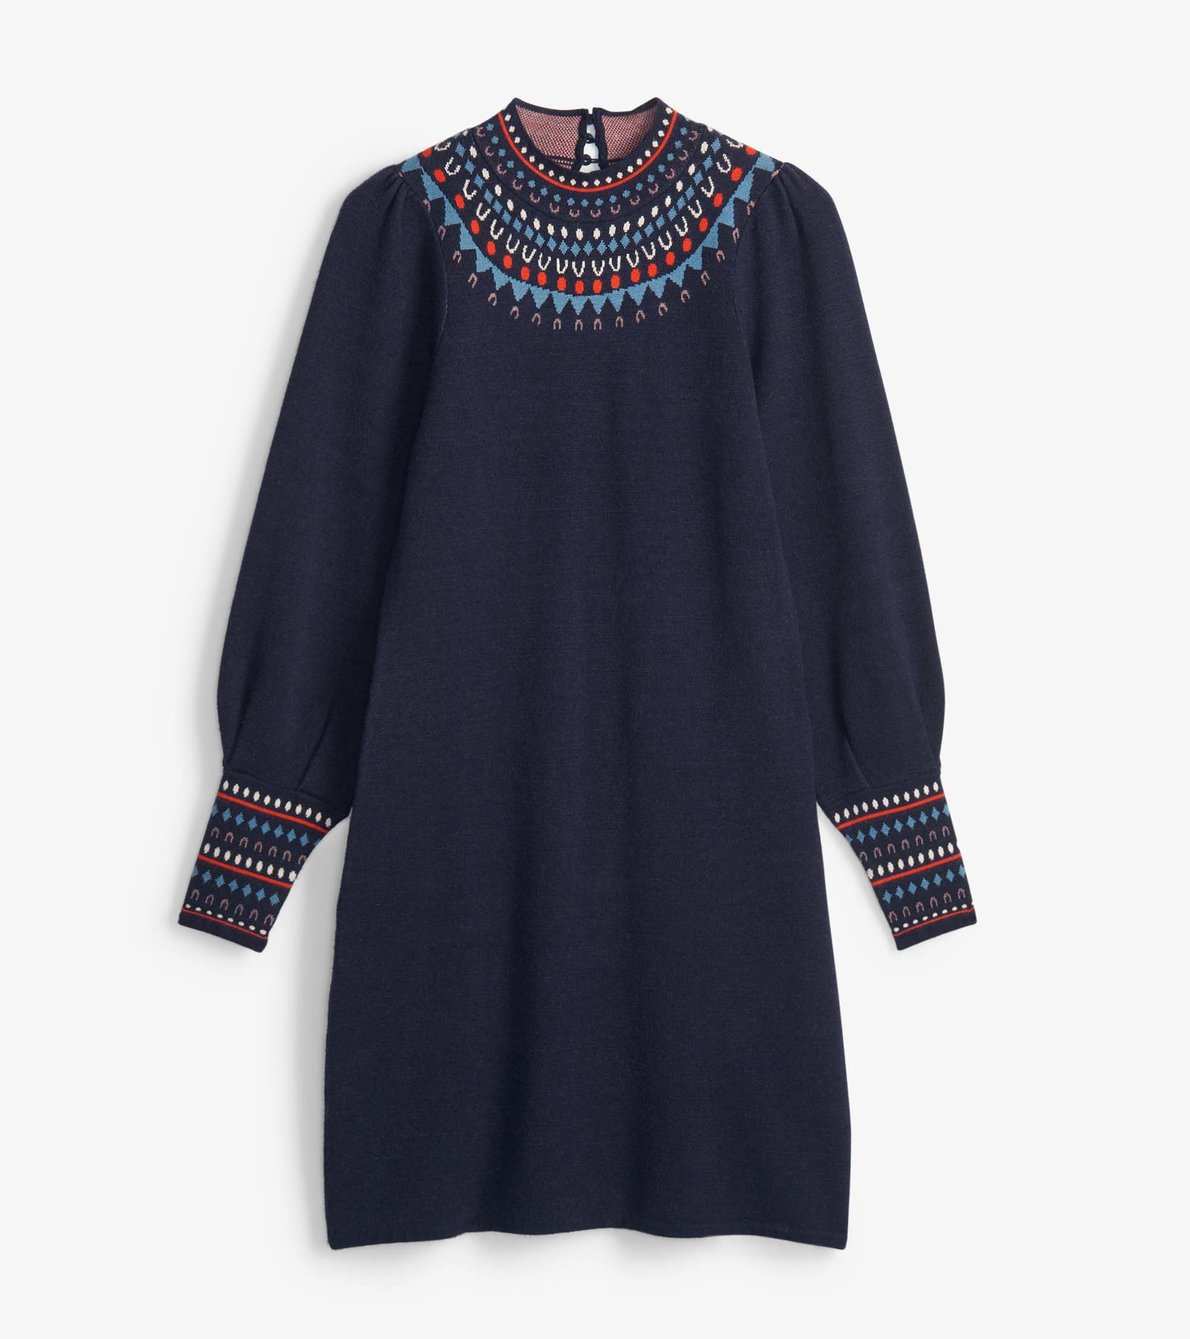 Just found a Soft Cotton Blair dress in Navy, & didn't have to pay above  retail! 🙋🏻‍♀️considering I did for the brown one. I've been looking for  that one for a while